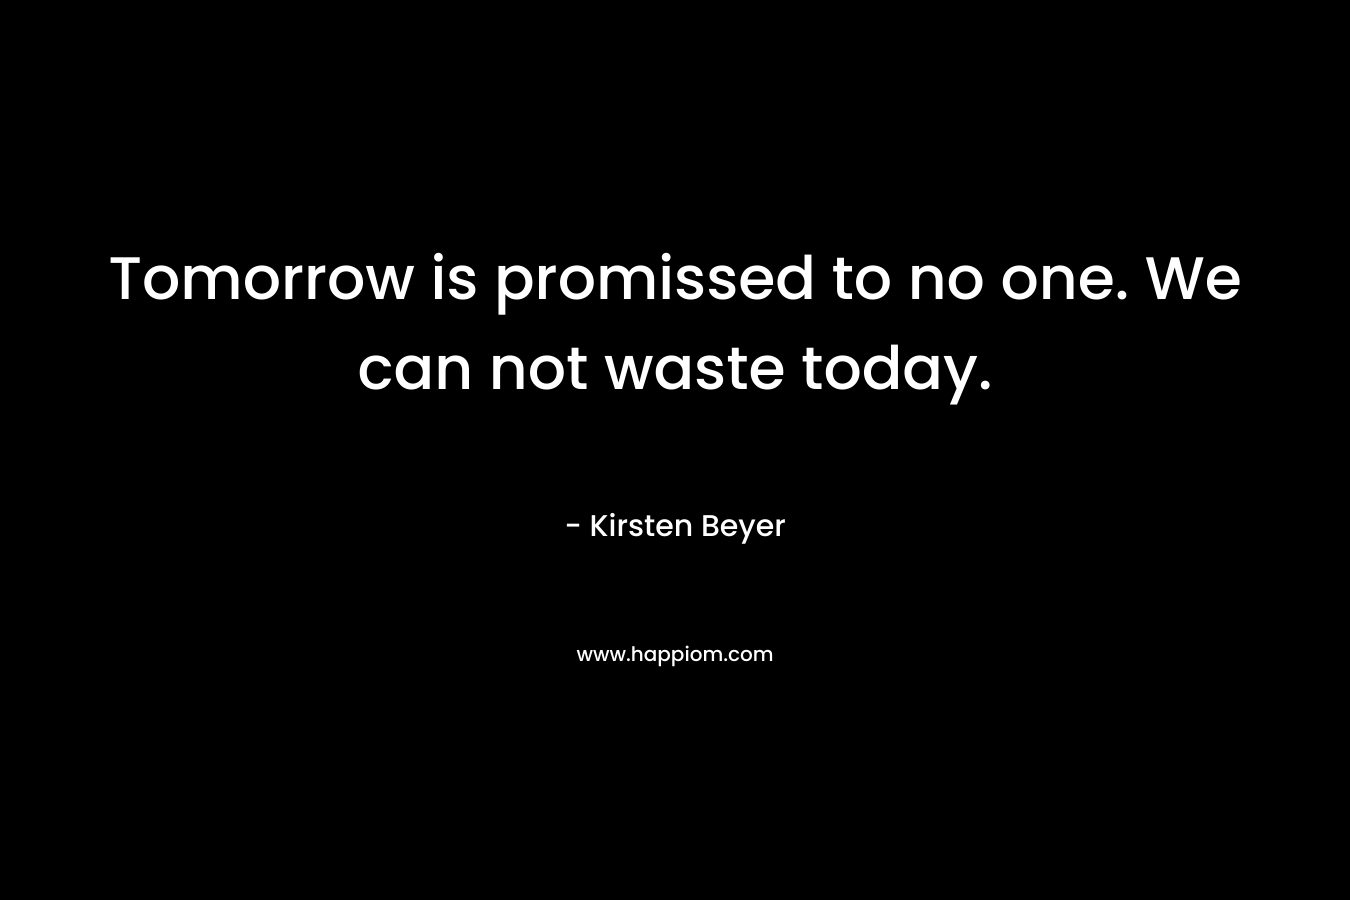 Tomorrow is promissed to no one. We can not waste today.